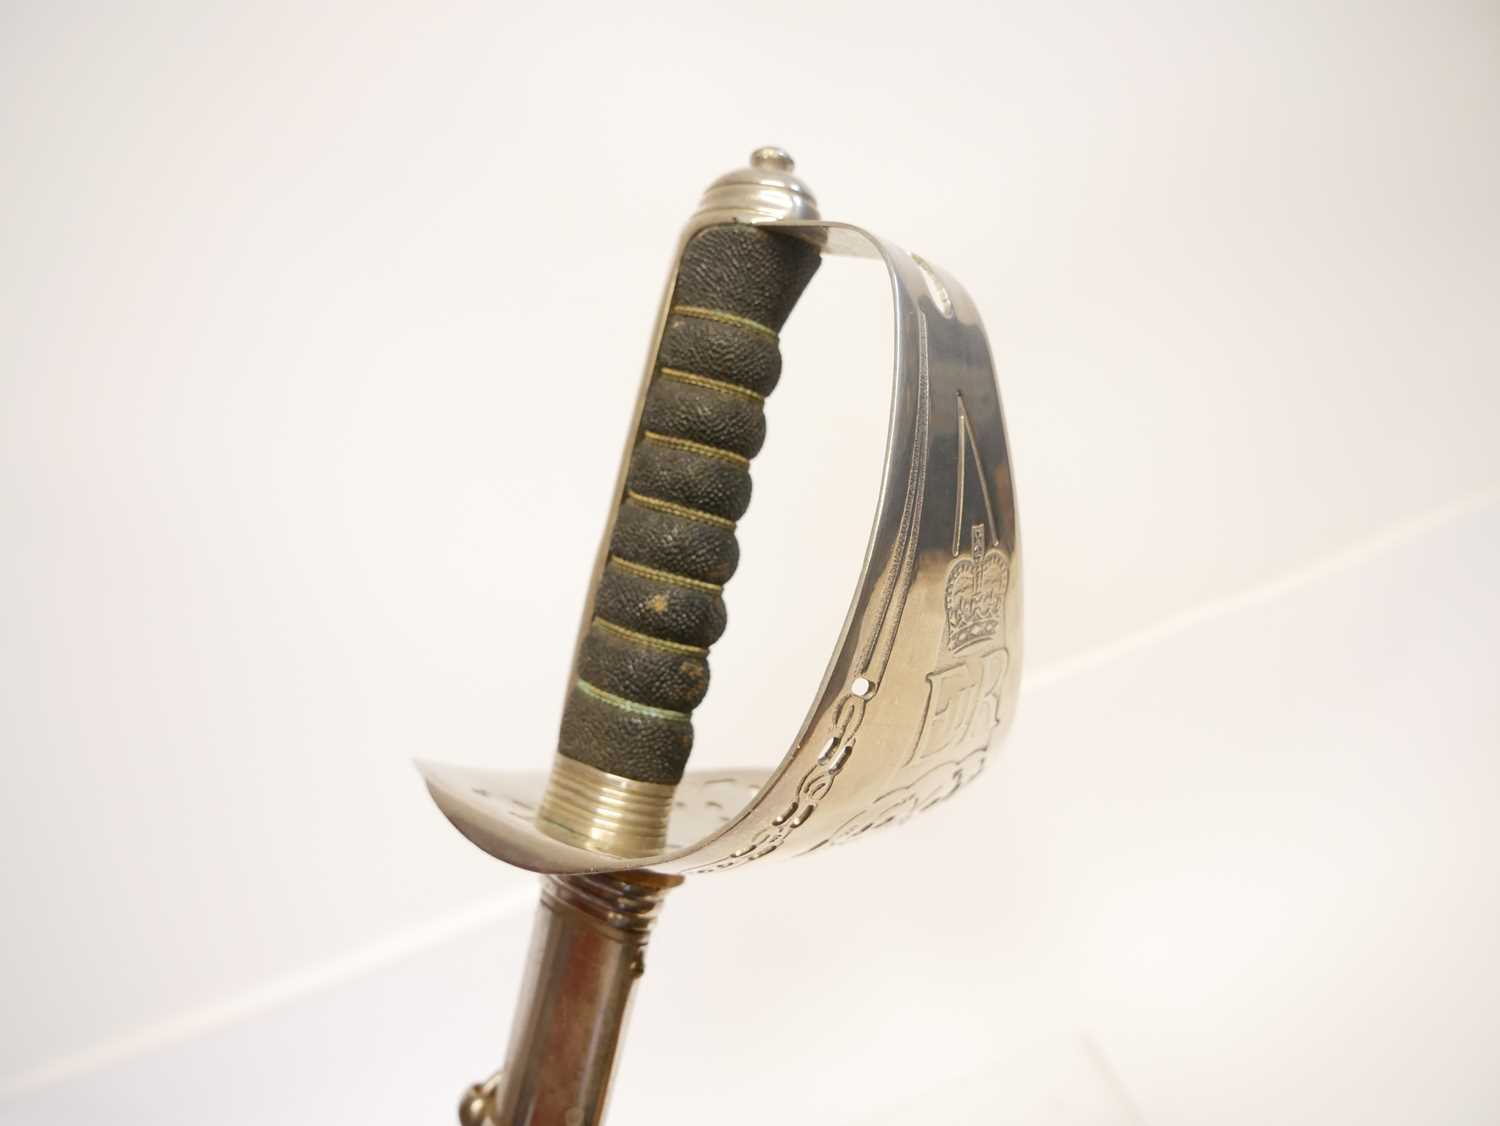 ERII 1897 pattern NCO sword and scabbard, double fullered proved blade, with pierced guard with - Image 11 of 11